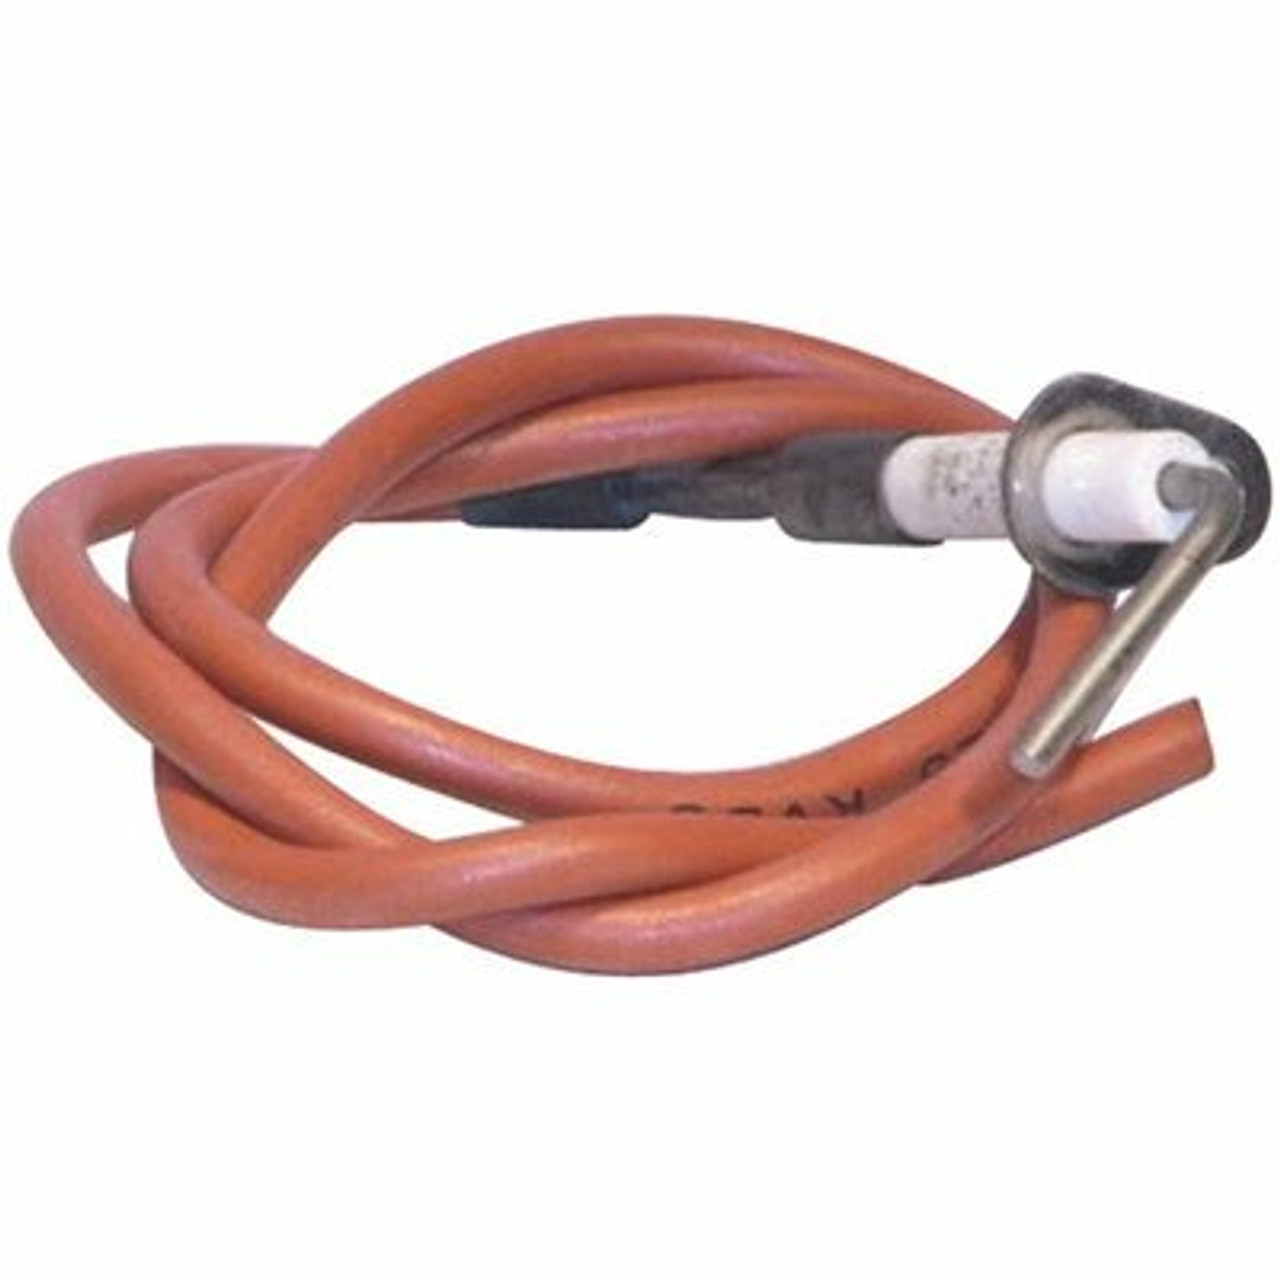 York Spark Ignitor With 21 In. Lead Wire